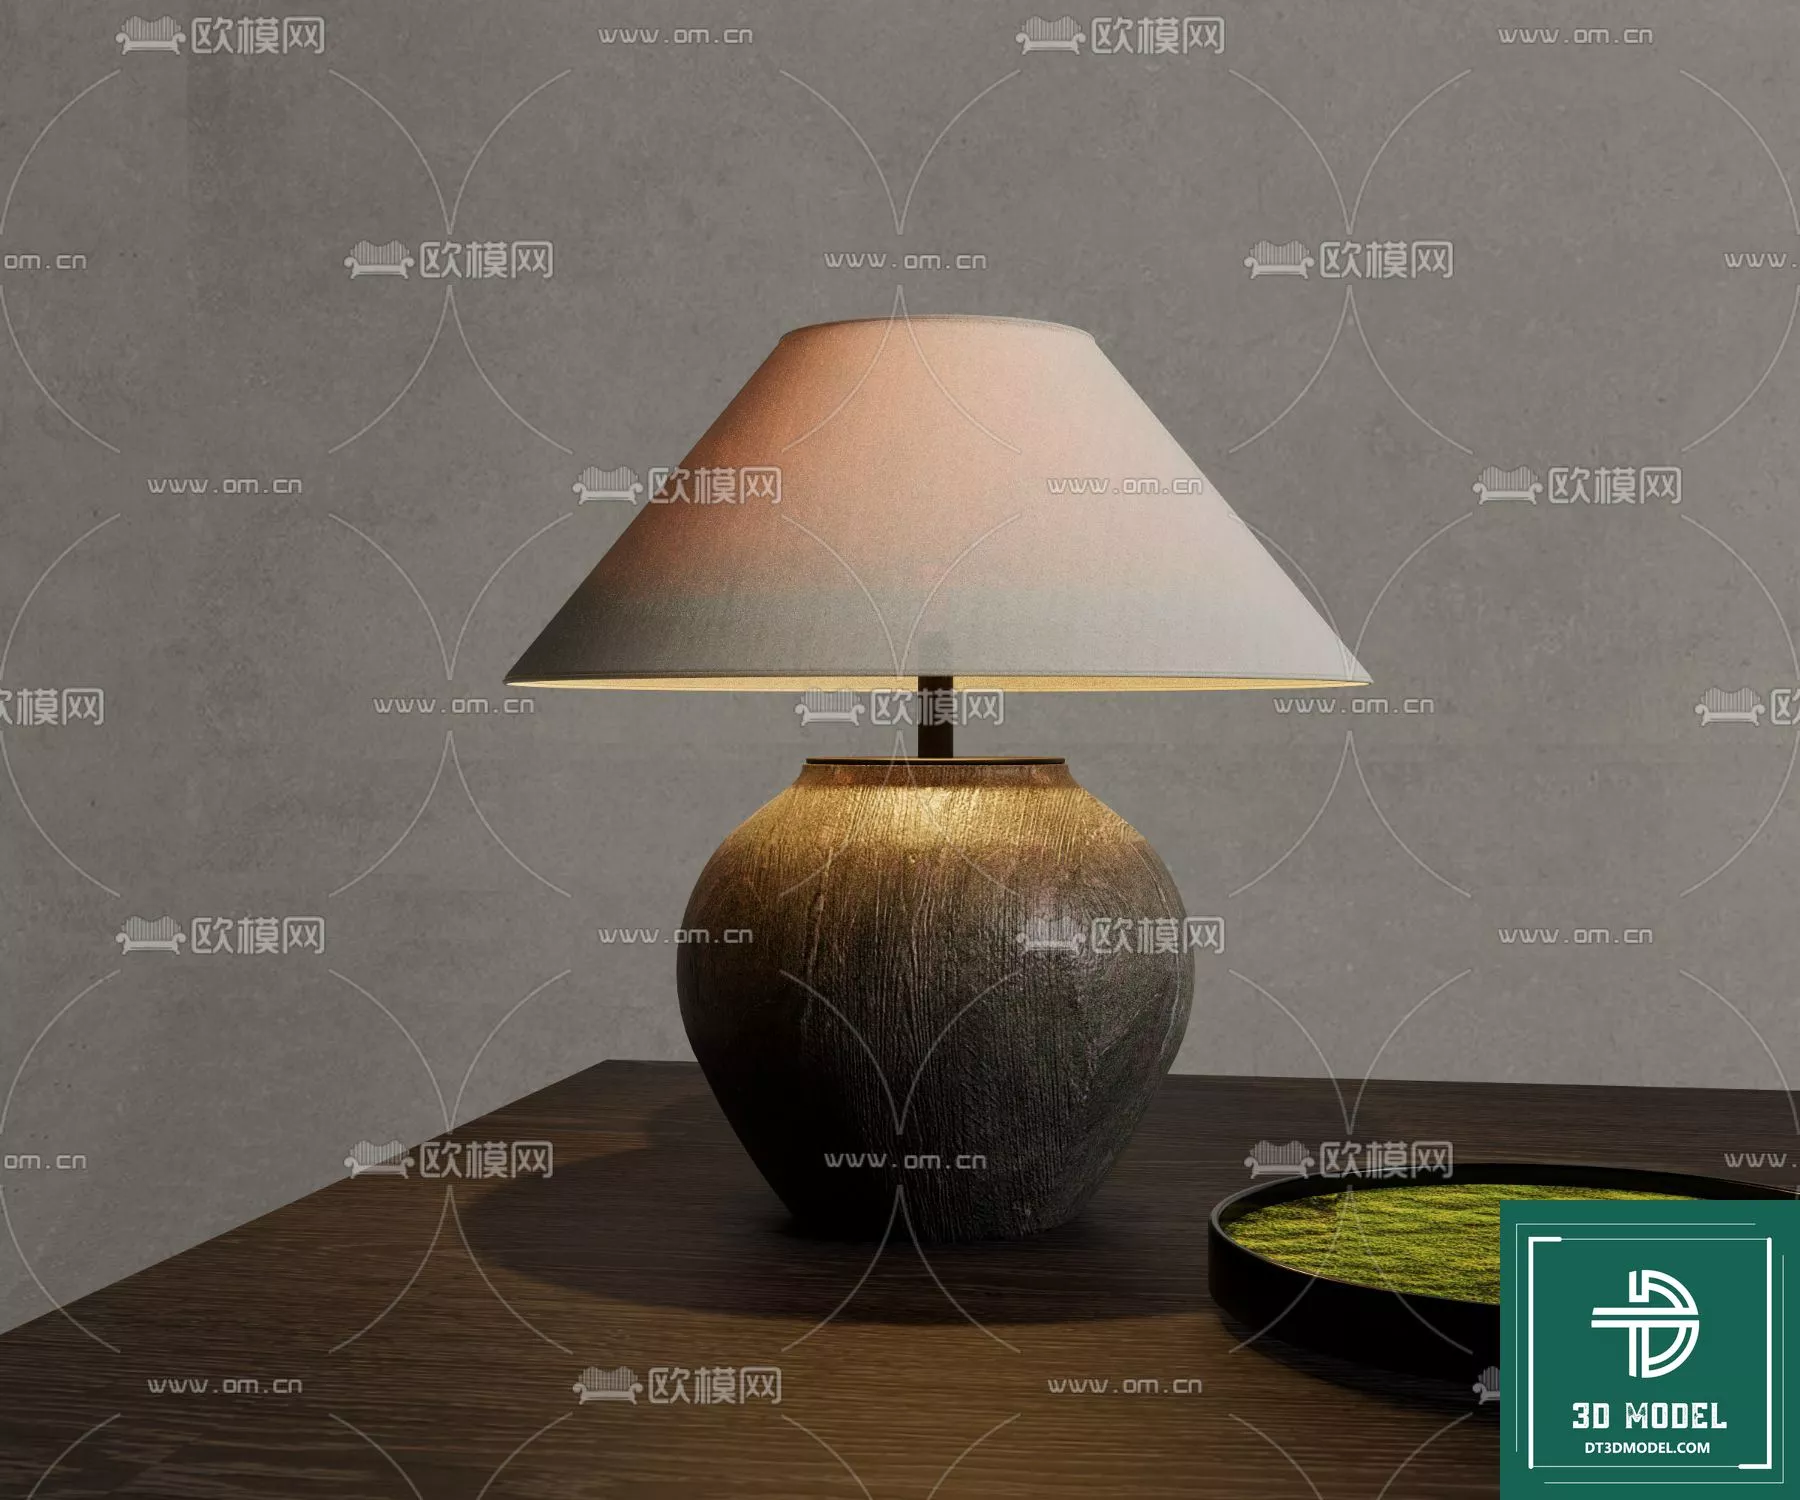 MODERN TABLE LAMP - SKETCHUP 3D MODEL - VRAY OR ENSCAPE - ID14553